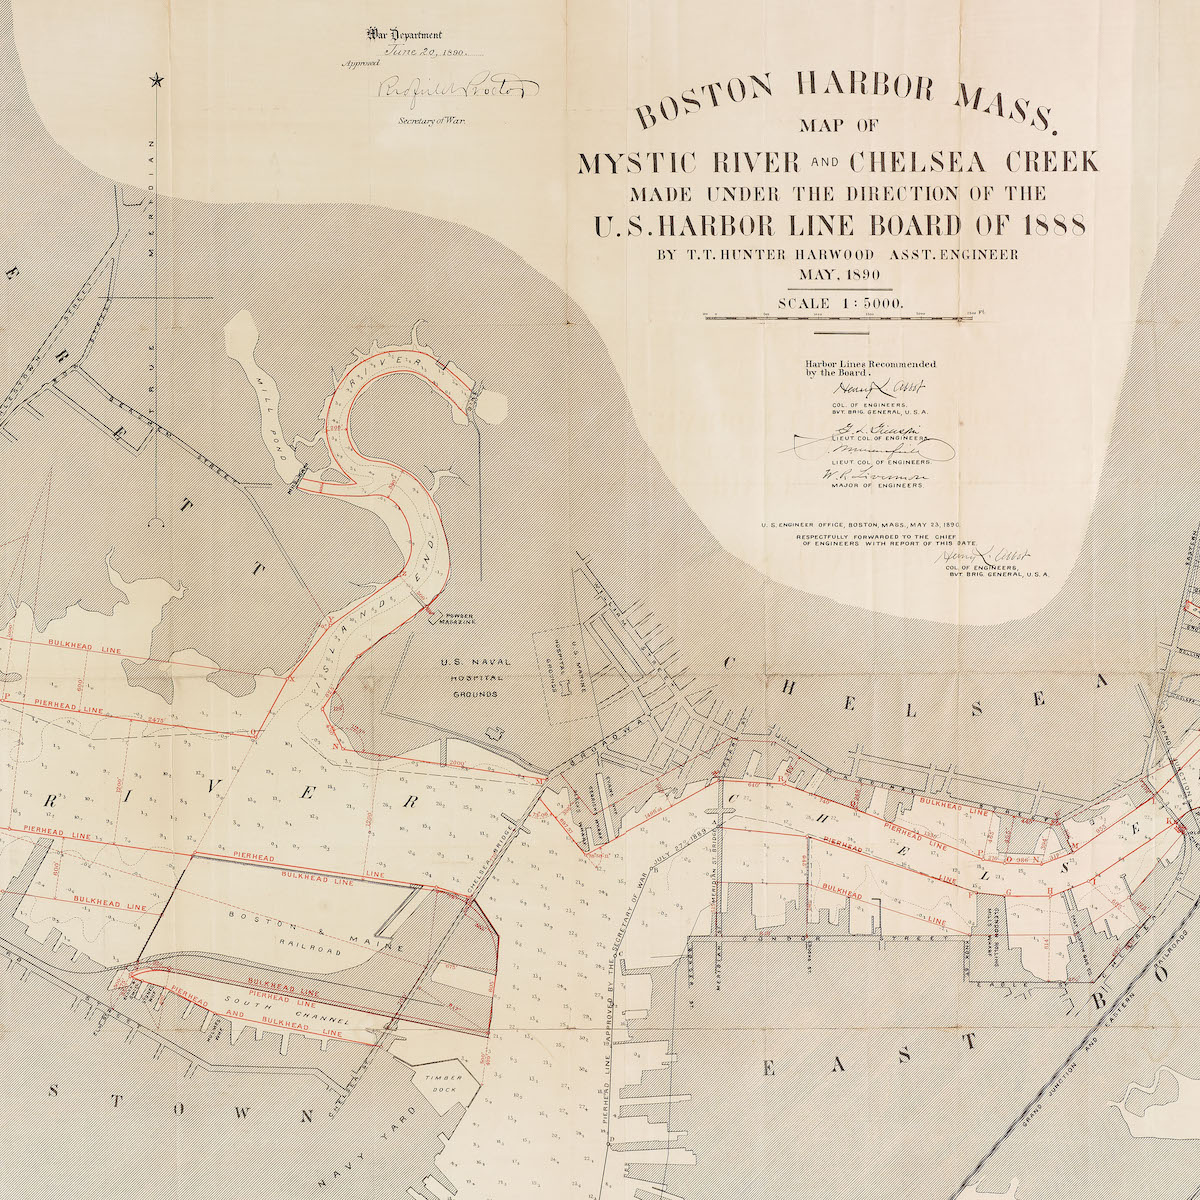 Image of Boston Harbor, Mass.: Map of Mystic River and Chelsea Creek